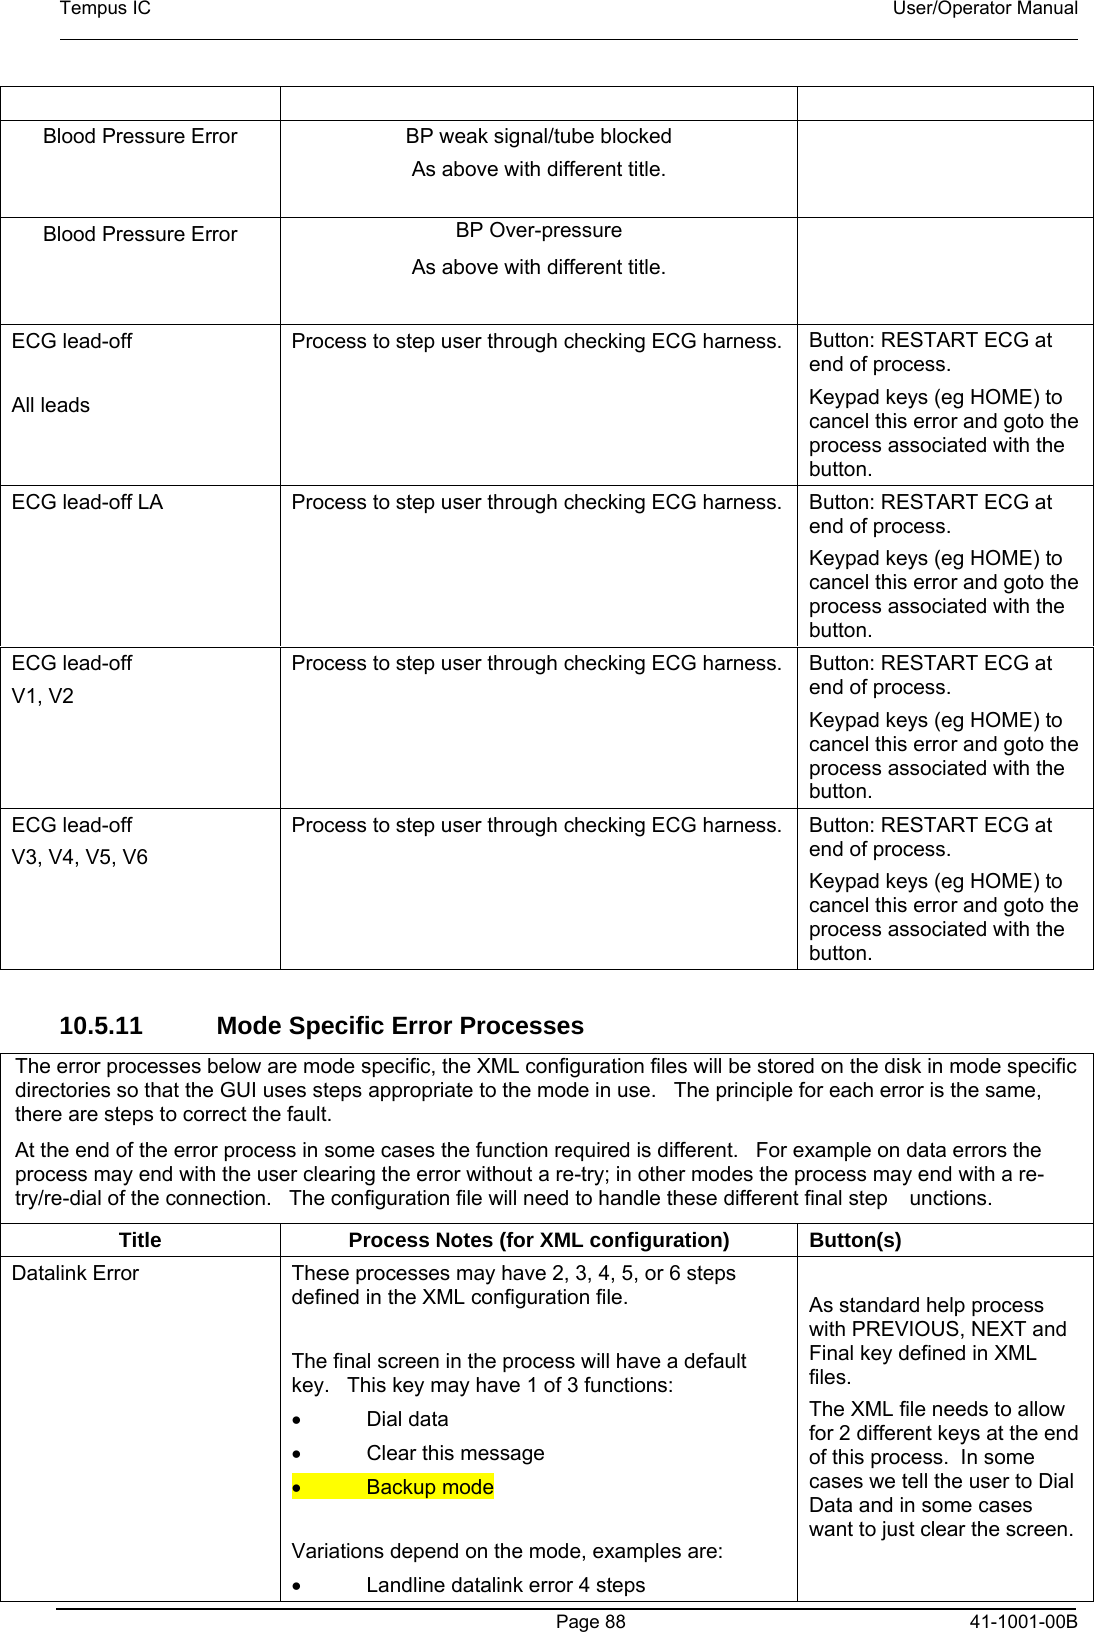 Tempus IC    User/Operator Manual      Page 88   41-1001-00B  Blood Pressure Error BP weak signal/tube blocked As above with different title.   Blood Pressure Error BP Over-pressure As above with different title.   ECG lead-off  All leads Process to step user through checking ECG harness.   Button: RESTART ECG at end of process. Keypad keys (eg HOME) to cancel this error and goto the process associated with the button. ECG lead-off LA Process to step user through checking ECG harness.   Button: RESTART ECG at end of process. Keypad keys (eg HOME) to cancel this error and goto the process associated with the button. ECG lead-off V1, V2 Process to step user through checking ECG harness.   Button: RESTART ECG at end of process. Keypad keys (eg HOME) to cancel this error and goto the process associated with the button. ECG lead-off V3, V4, V5, V6 Process to step user through checking ECG harness.   Button: RESTART ECG at end of process. Keypad keys (eg HOME) to cancel this error and goto the process associated with the button.  10.5.11   Mode Specific Error Processes The error processes below are mode specific, the XML configuration files will be stored on the disk in mode specific directories so that the GUI uses steps appropriate to the mode in use.   The principle for each error is the same, there are steps to correct the fault. At the end of the error process in some cases the function required is different.   For example on data errors the process may end with the user clearing the error without a re-try; in other modes the process may end with a re-try/re-dial of the connection.   The configuration file will need to handle these different final step unctions. Title  Process Notes (for XML configuration)  Button(s) Datalink Error These processes may have 2, 3, 4, 5, or 6 steps defined in the XML configuration file.    The final screen in the process will have a default key.   This key may have 1 of 3 functions: • Dial data •  Clear this message • Backup mode  Variations depend on the mode, examples are: •  Landline datalink error 4 steps  As standard help process with PREVIOUS, NEXT and Final key defined in XML files. The XML file needs to allow for 2 different keys at the end of this process.  In some cases we tell the user to Dial Data and in some cases want to just clear the screen.  